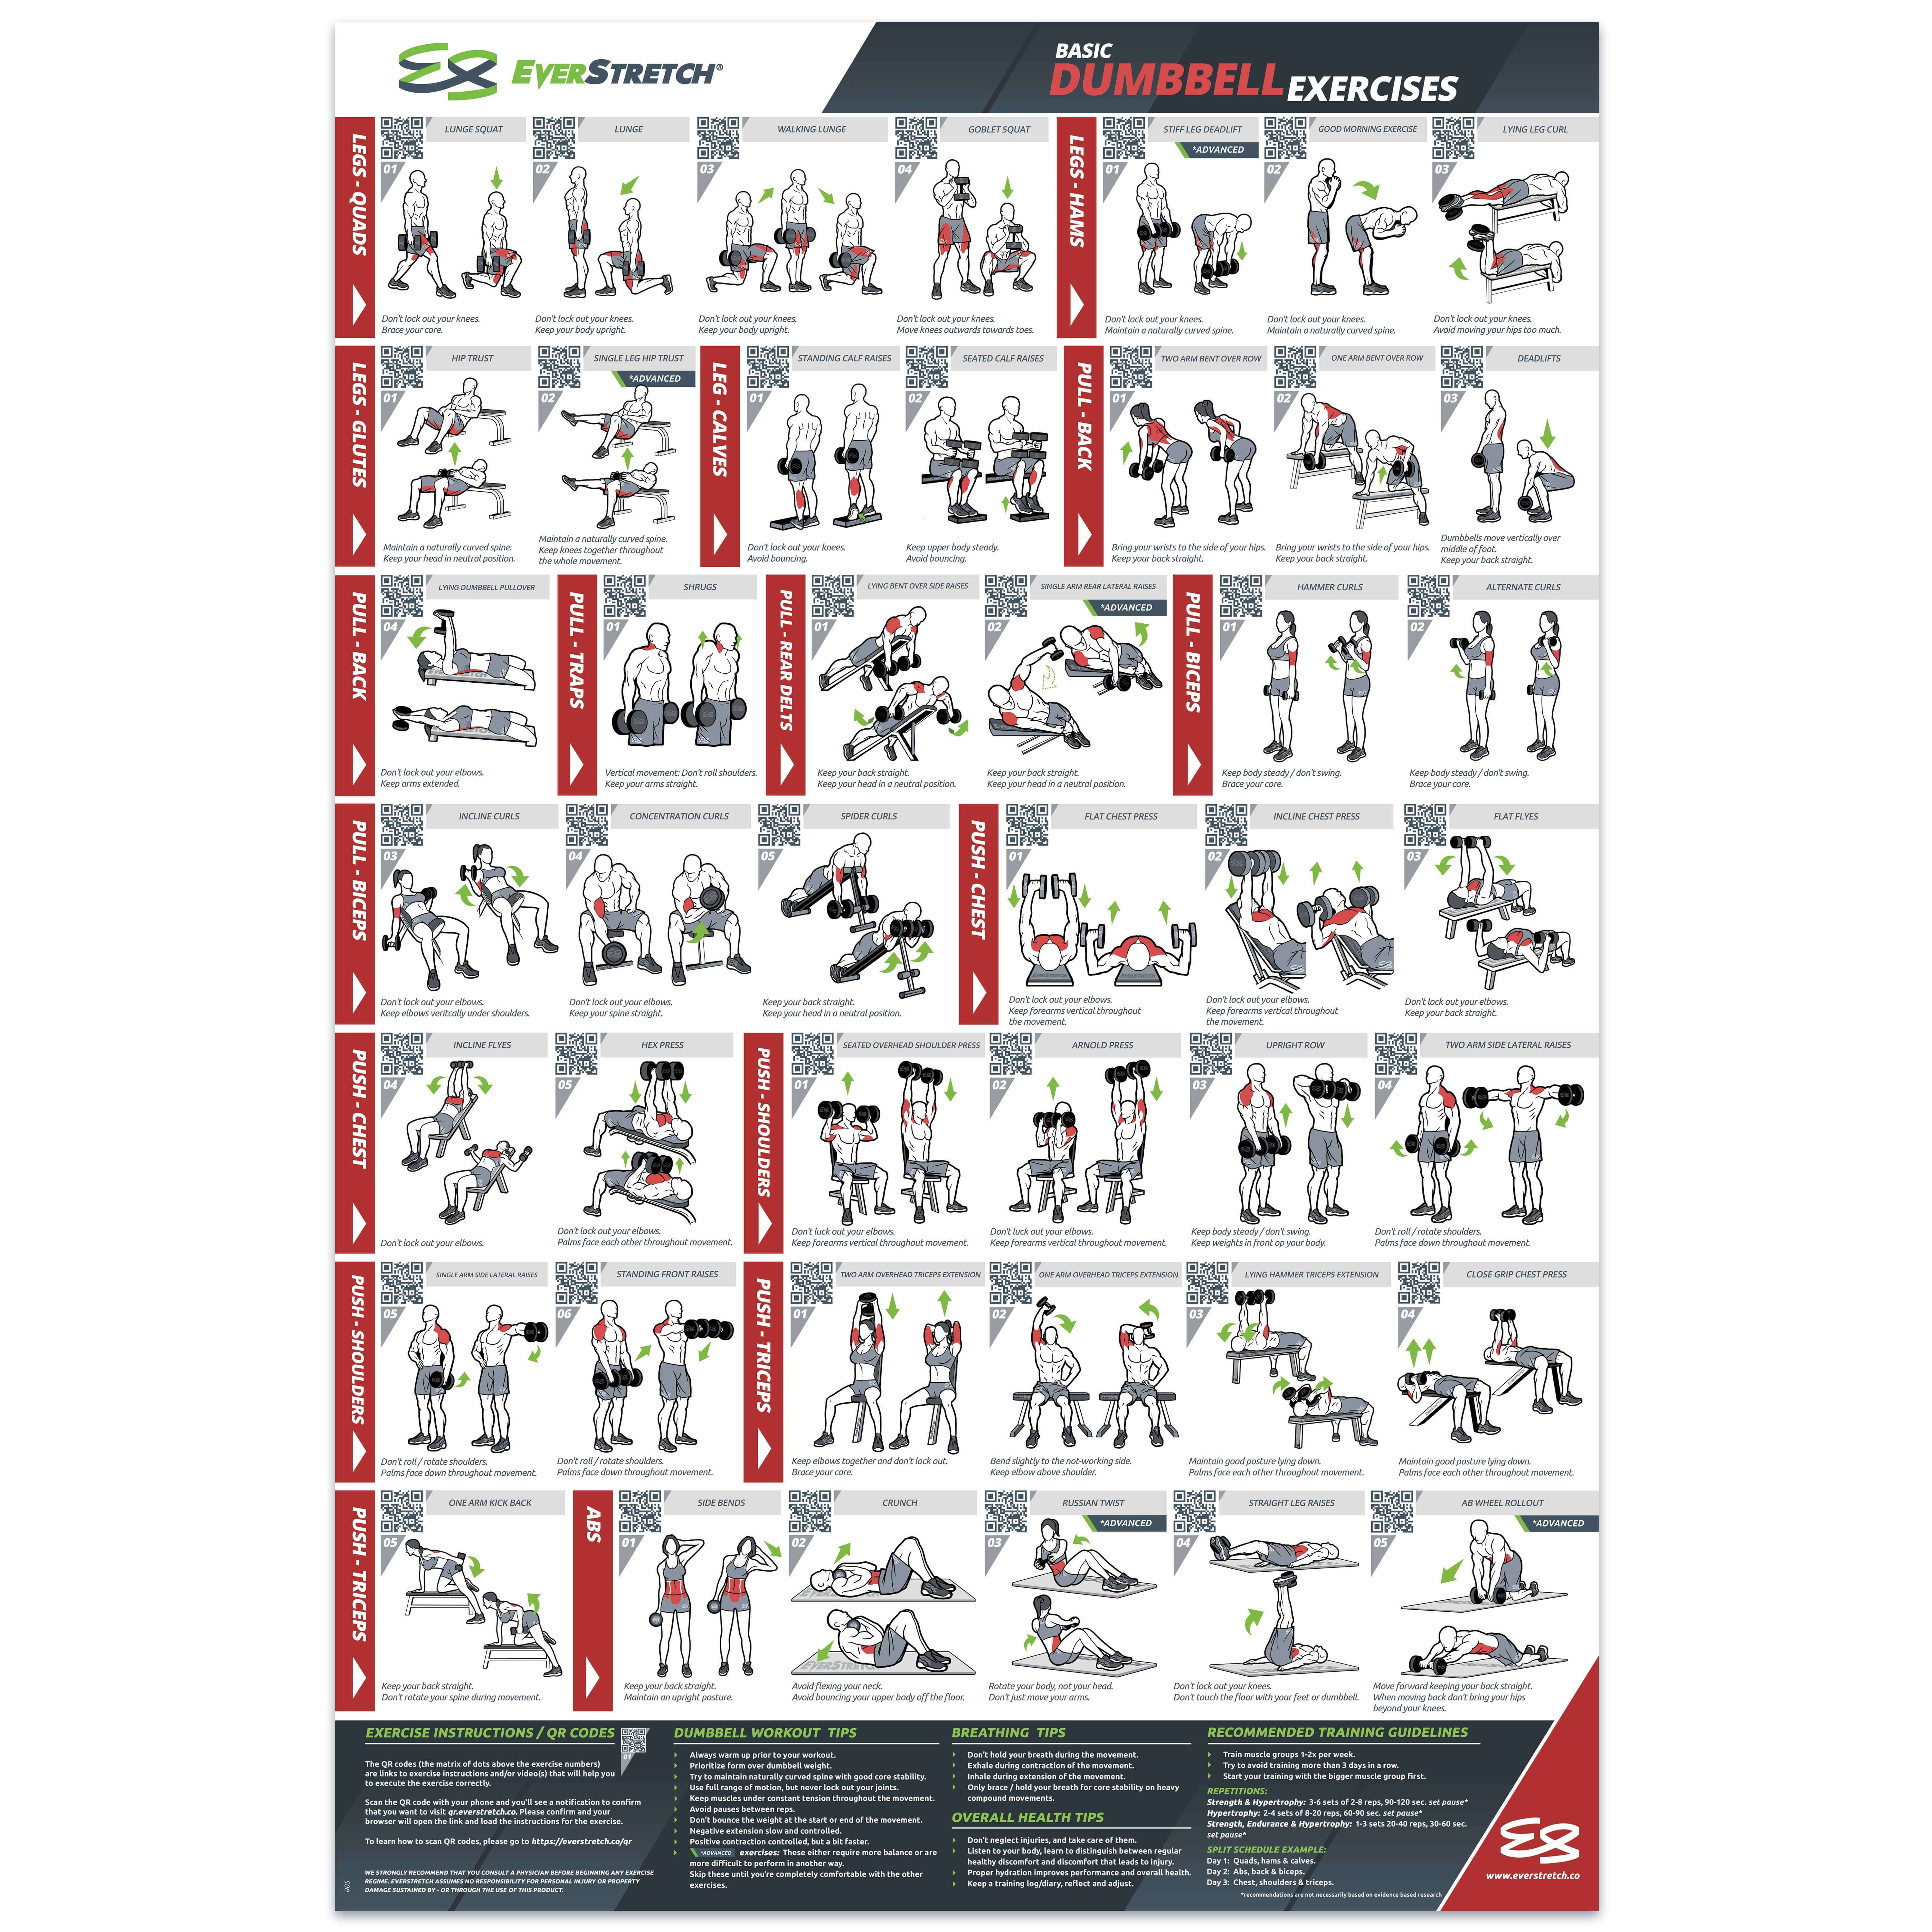 24 x 36 Laminated Workout Poster with 37 Stretching Exercises Each Stretch with Easy to Follow Video Instructions EverStretch Basic Stretching Poster for Home Gym 